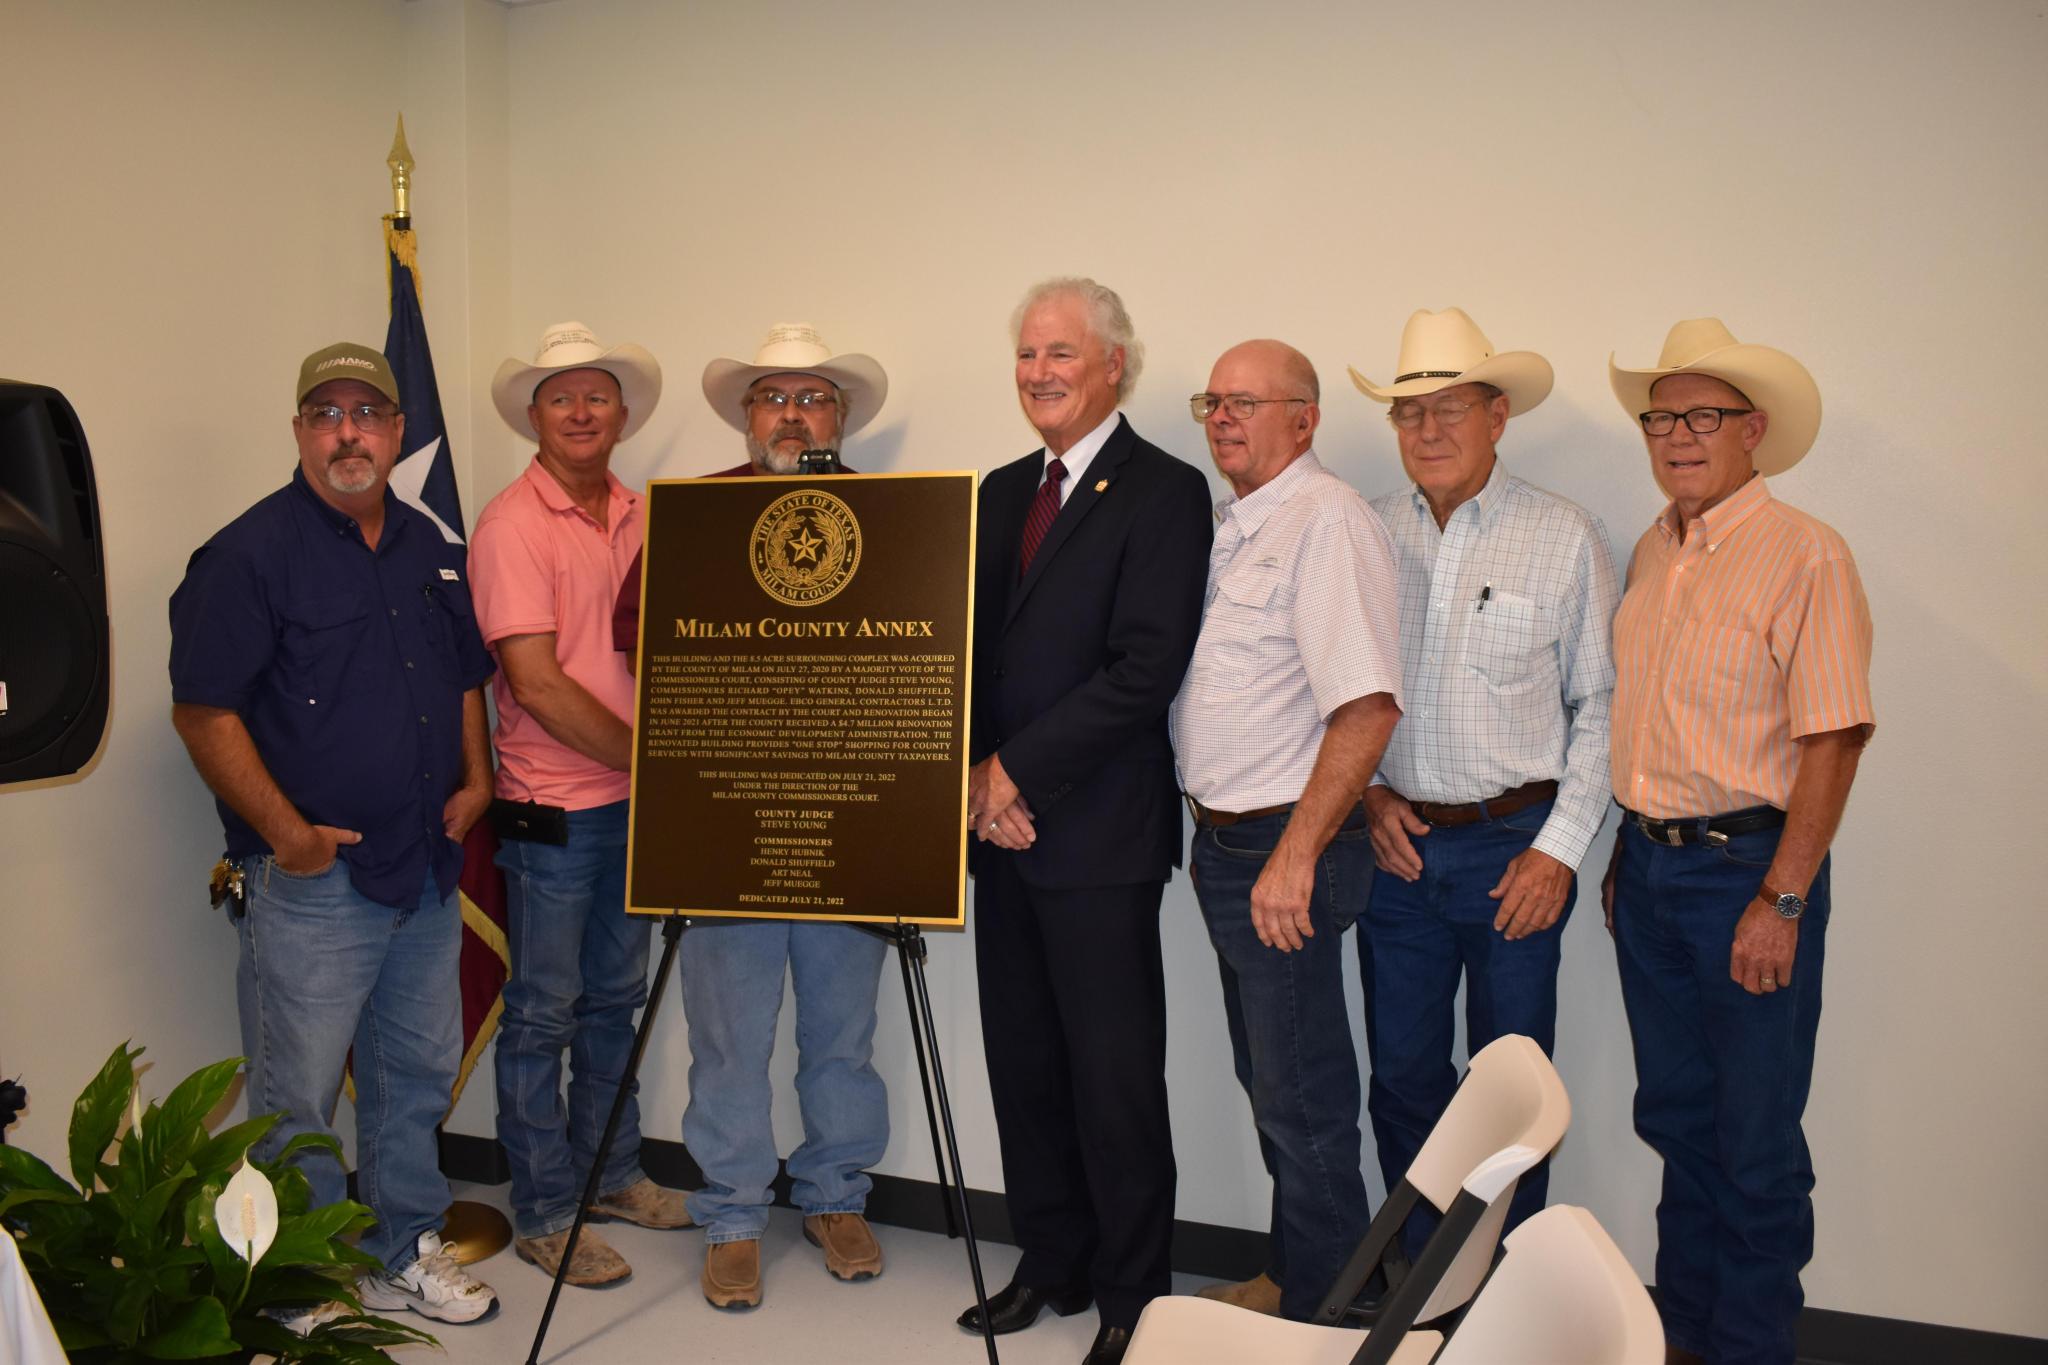 MIlam County Annex holds grand opening The Cameron Herald